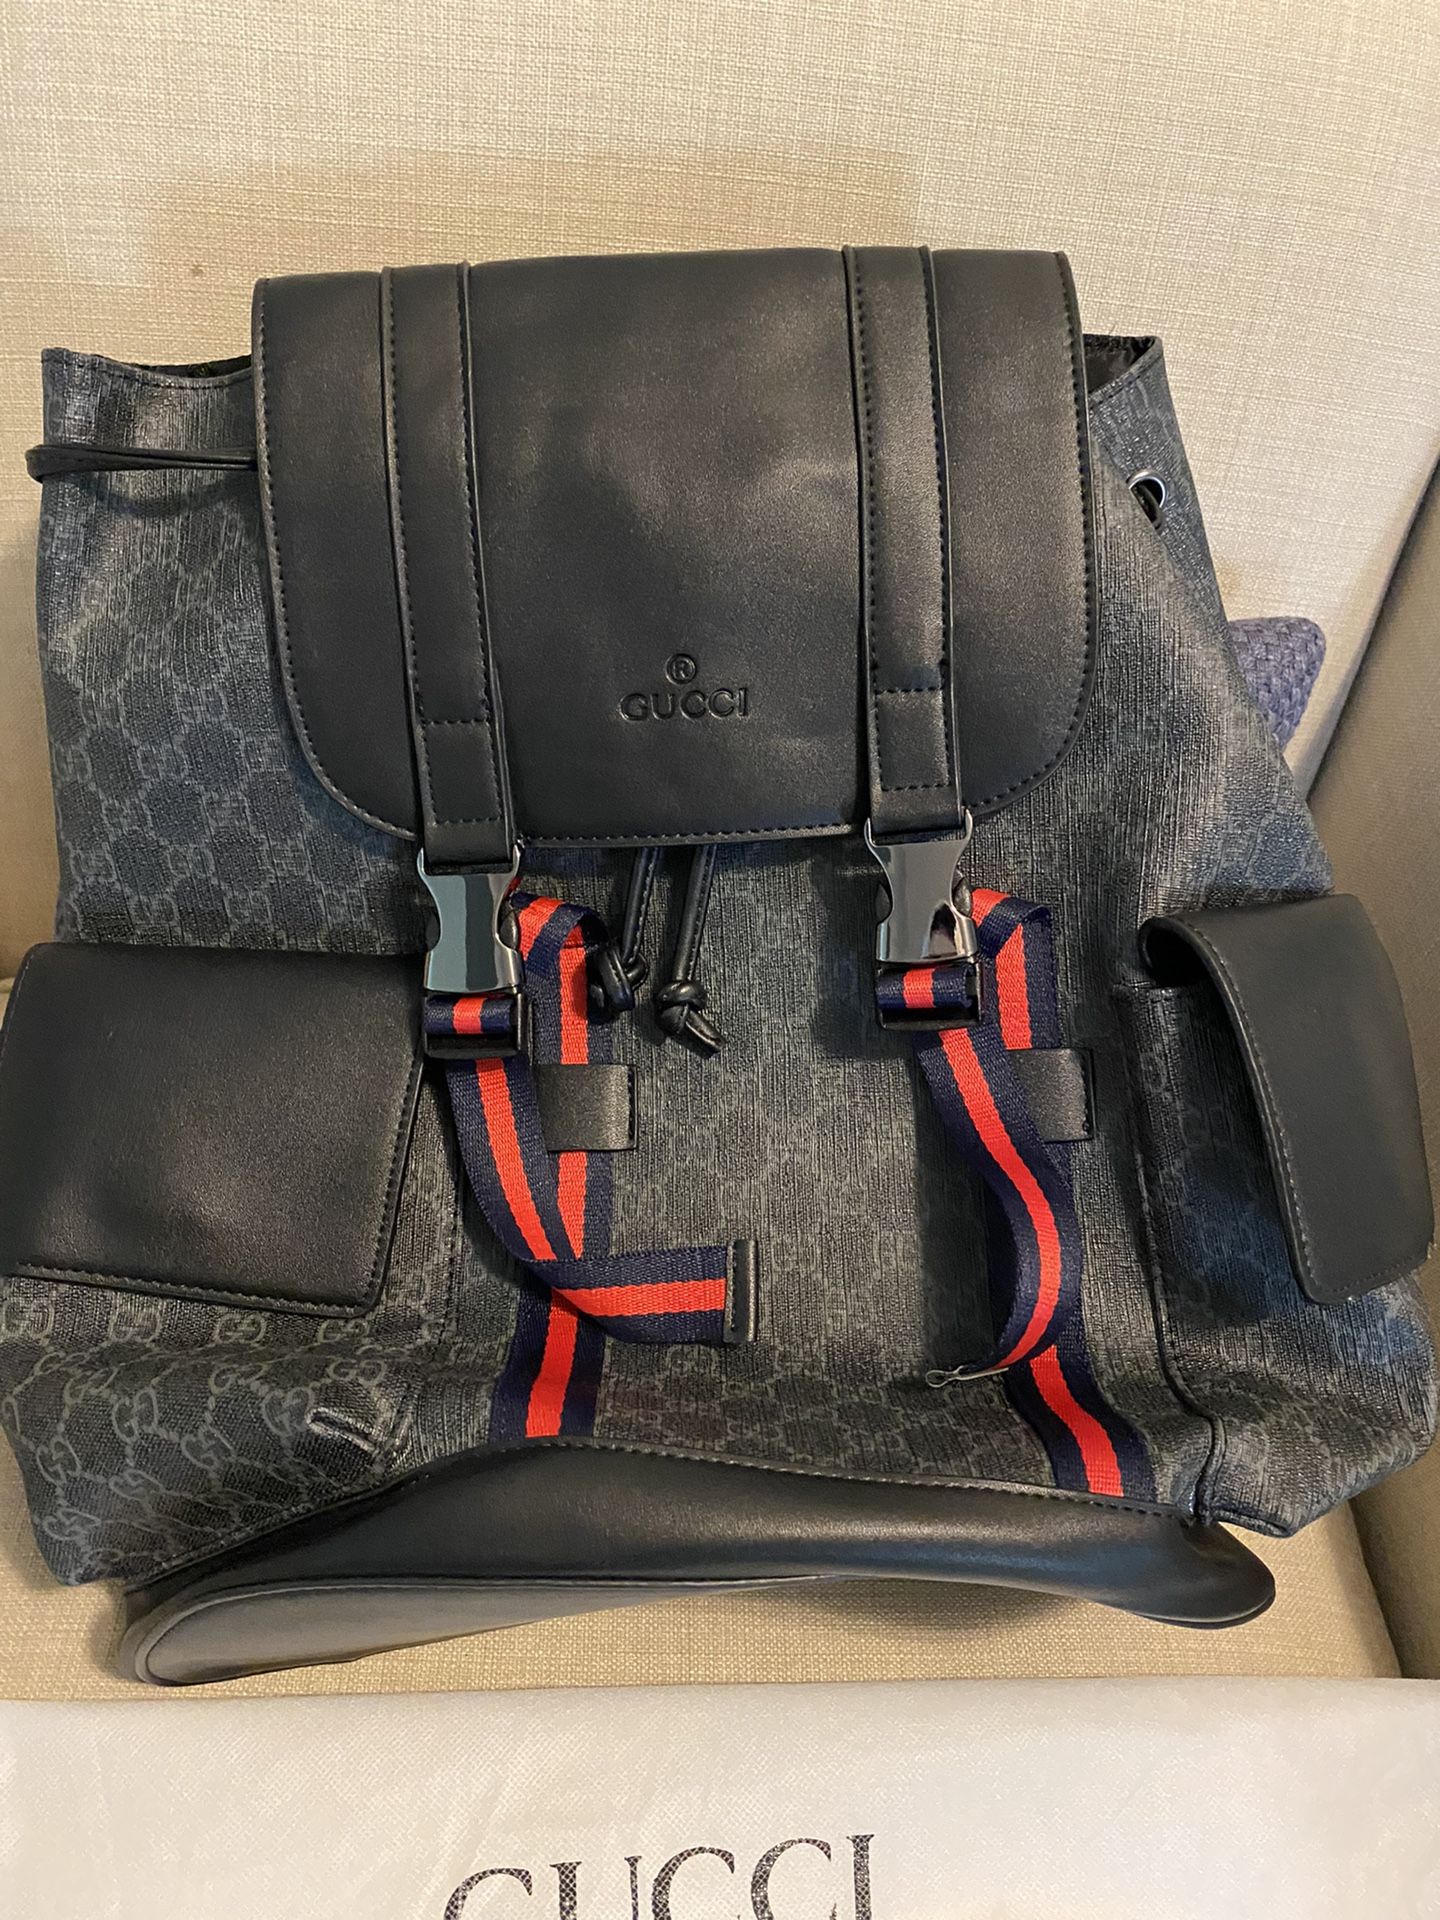 Unisex Gucci Backpack Perfect Condition w/ Sleeper